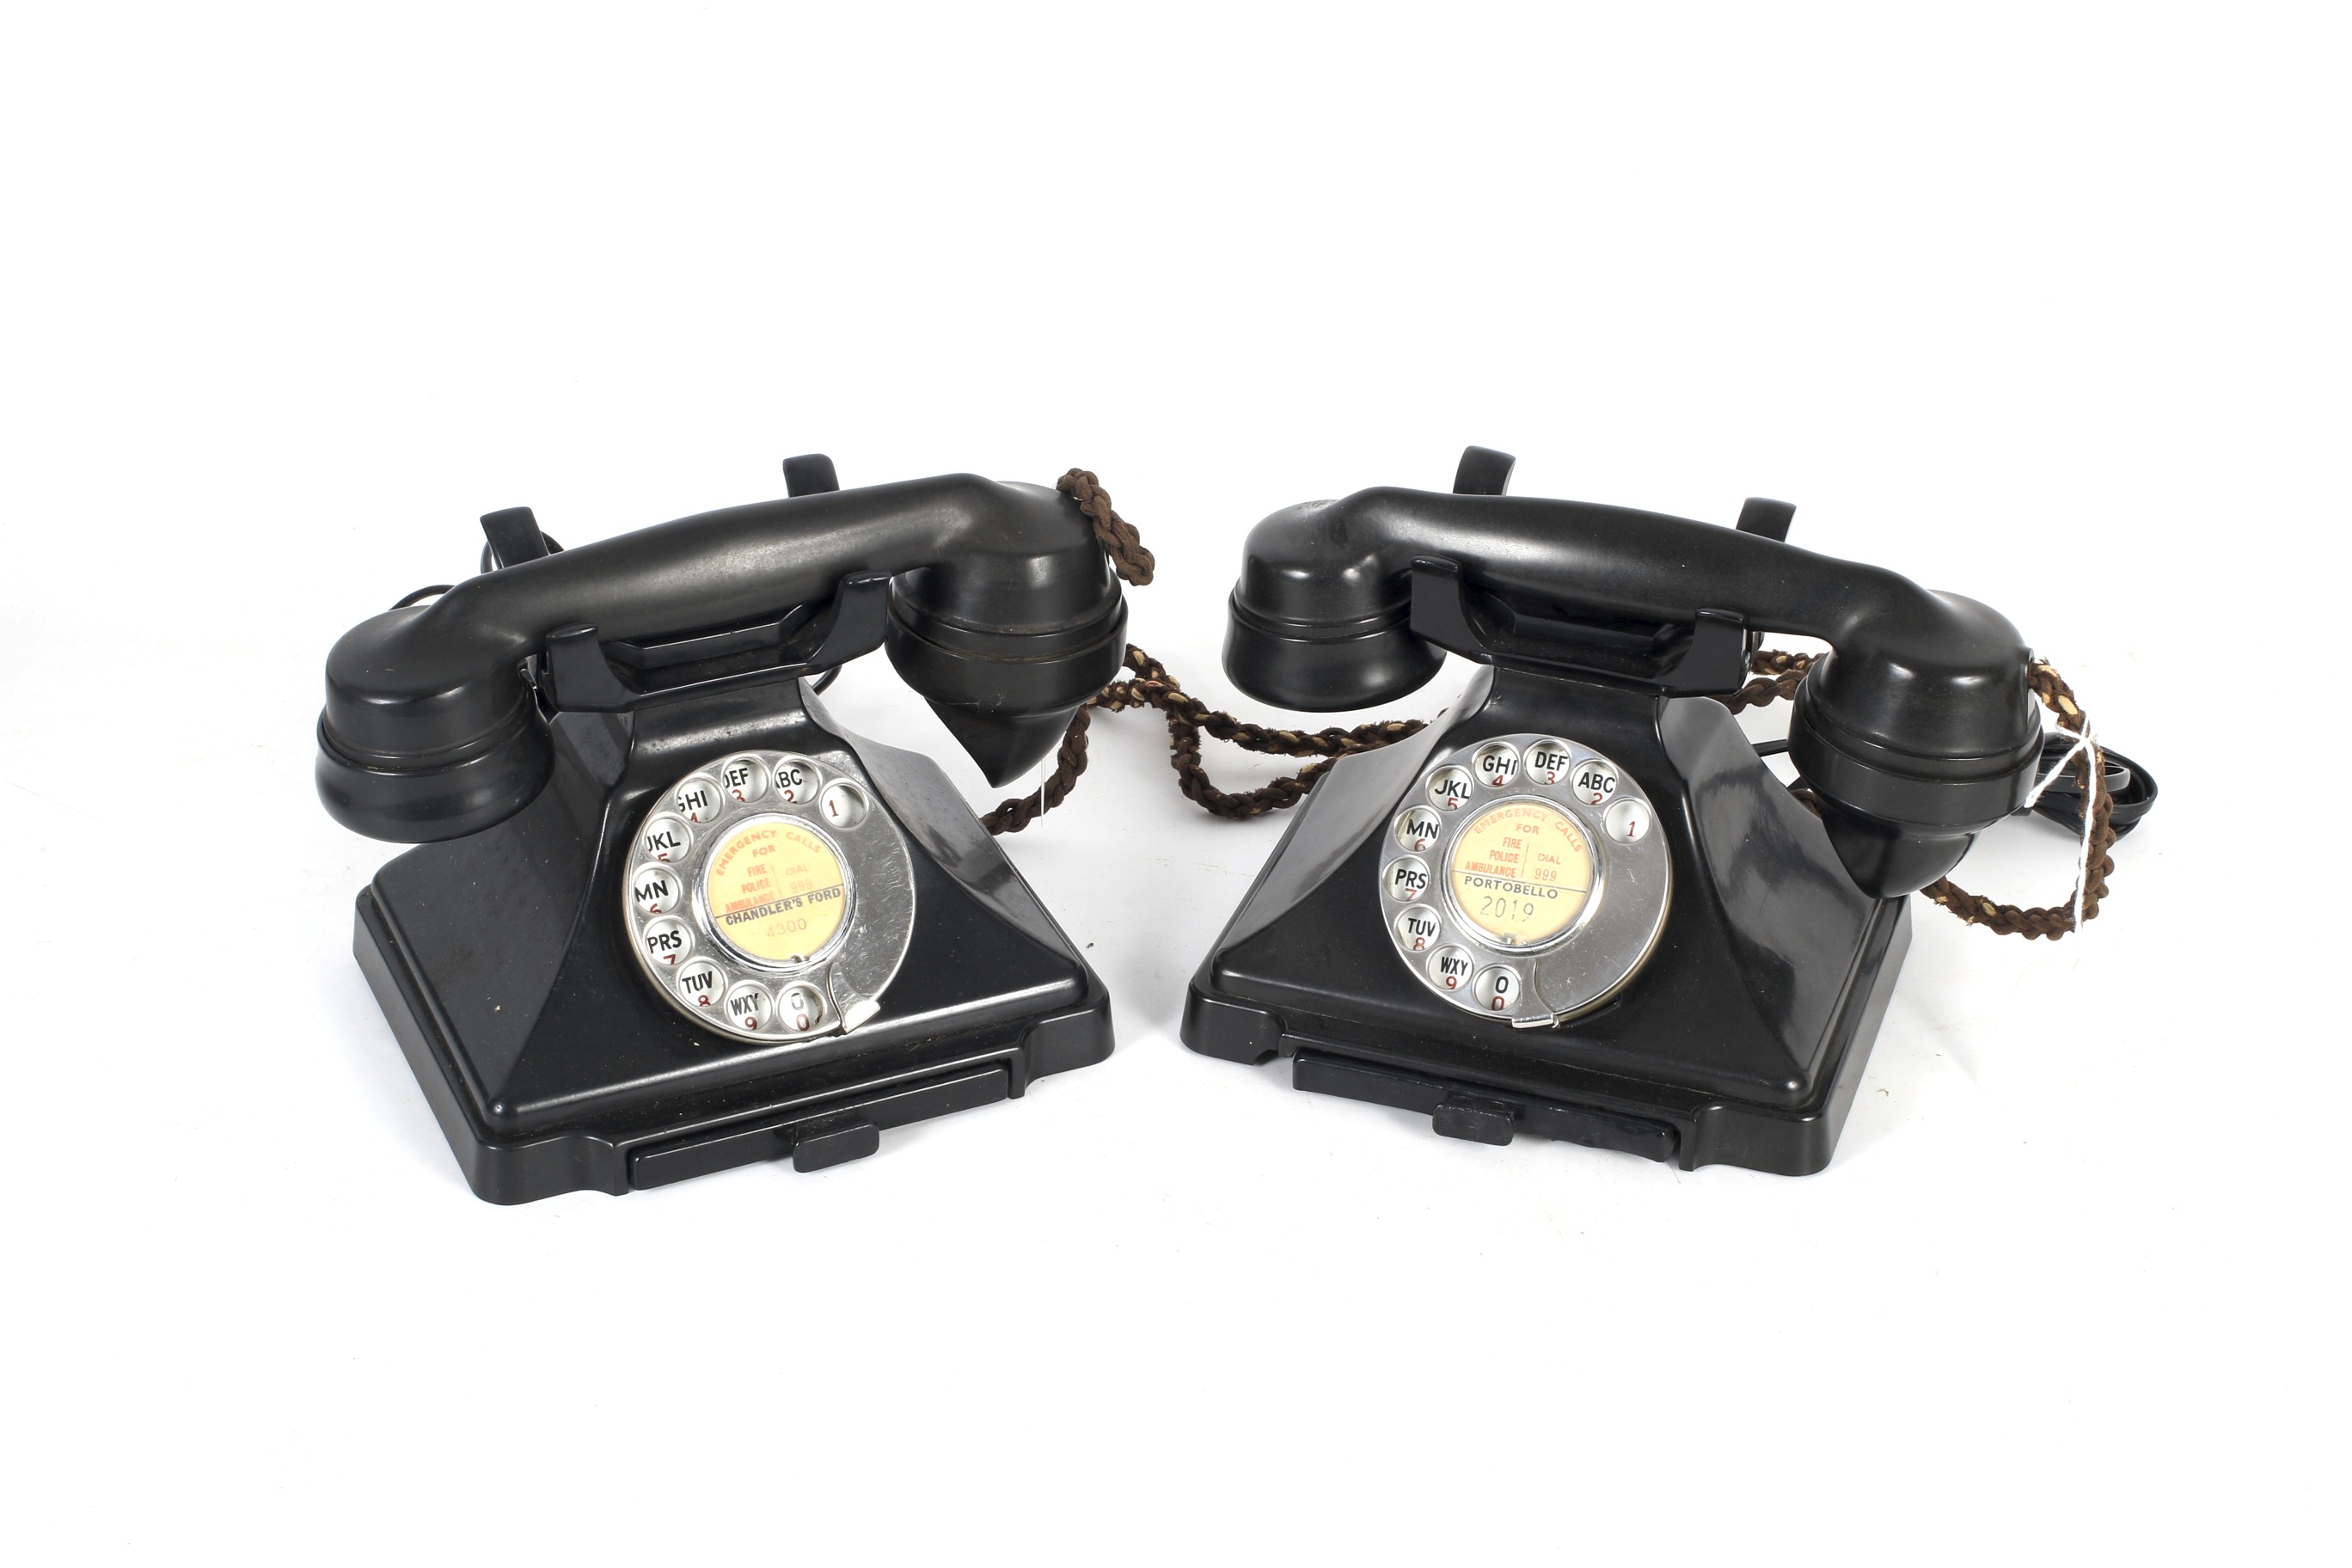 Two rotary pyramid black Bakelite 232 telephones with drawer.